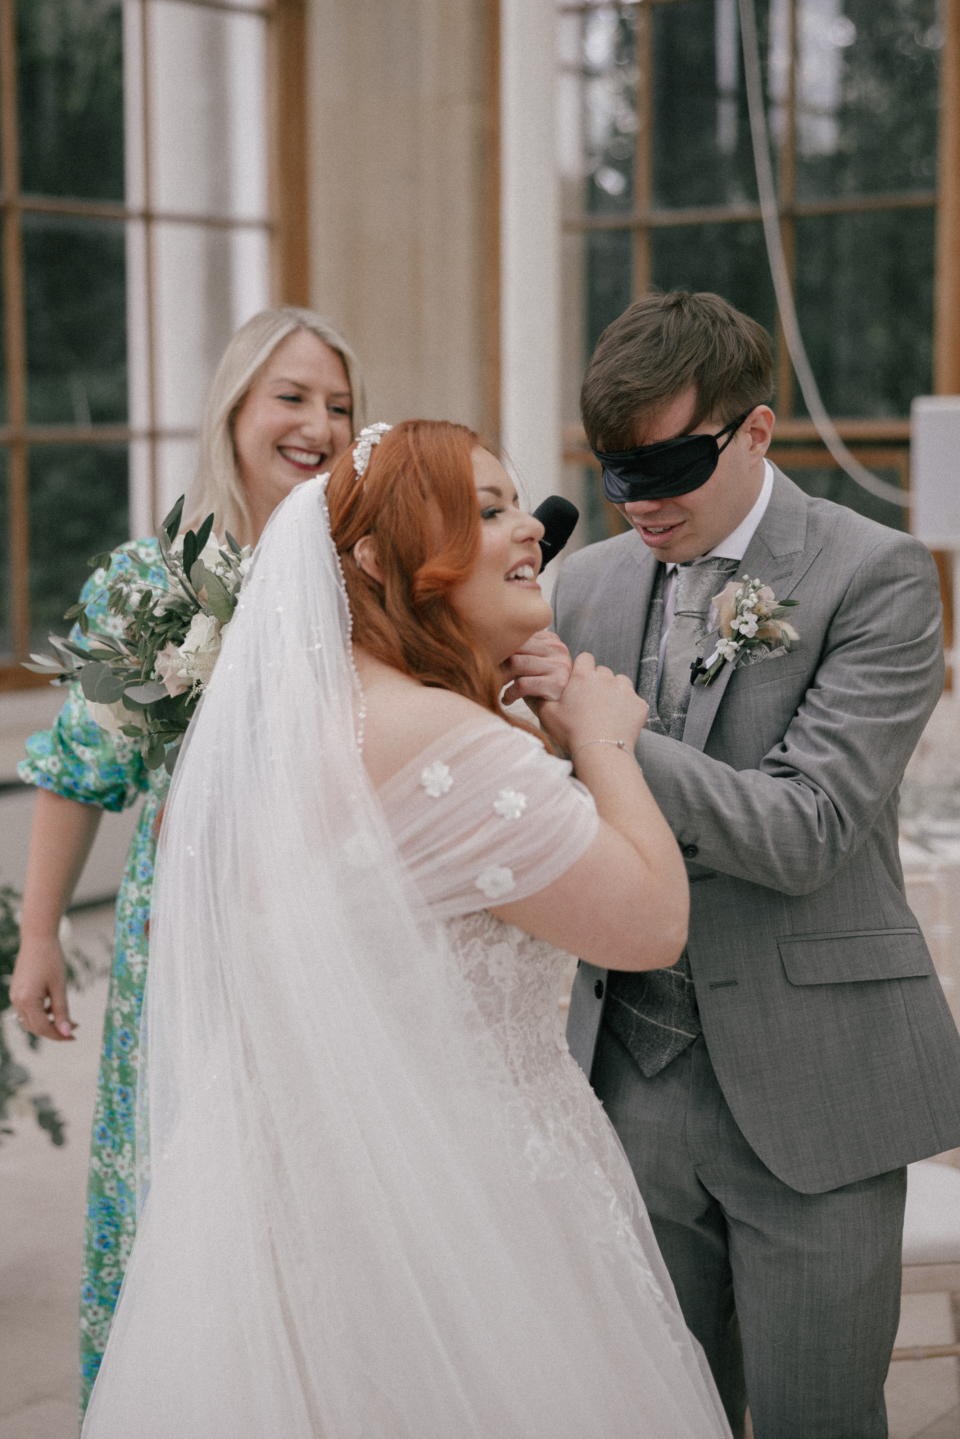 Cave felt his bride's dress before taking off his blindfold to see his soon-to-be wife. (eternal-imaging/Philip White Wed/SWNS)